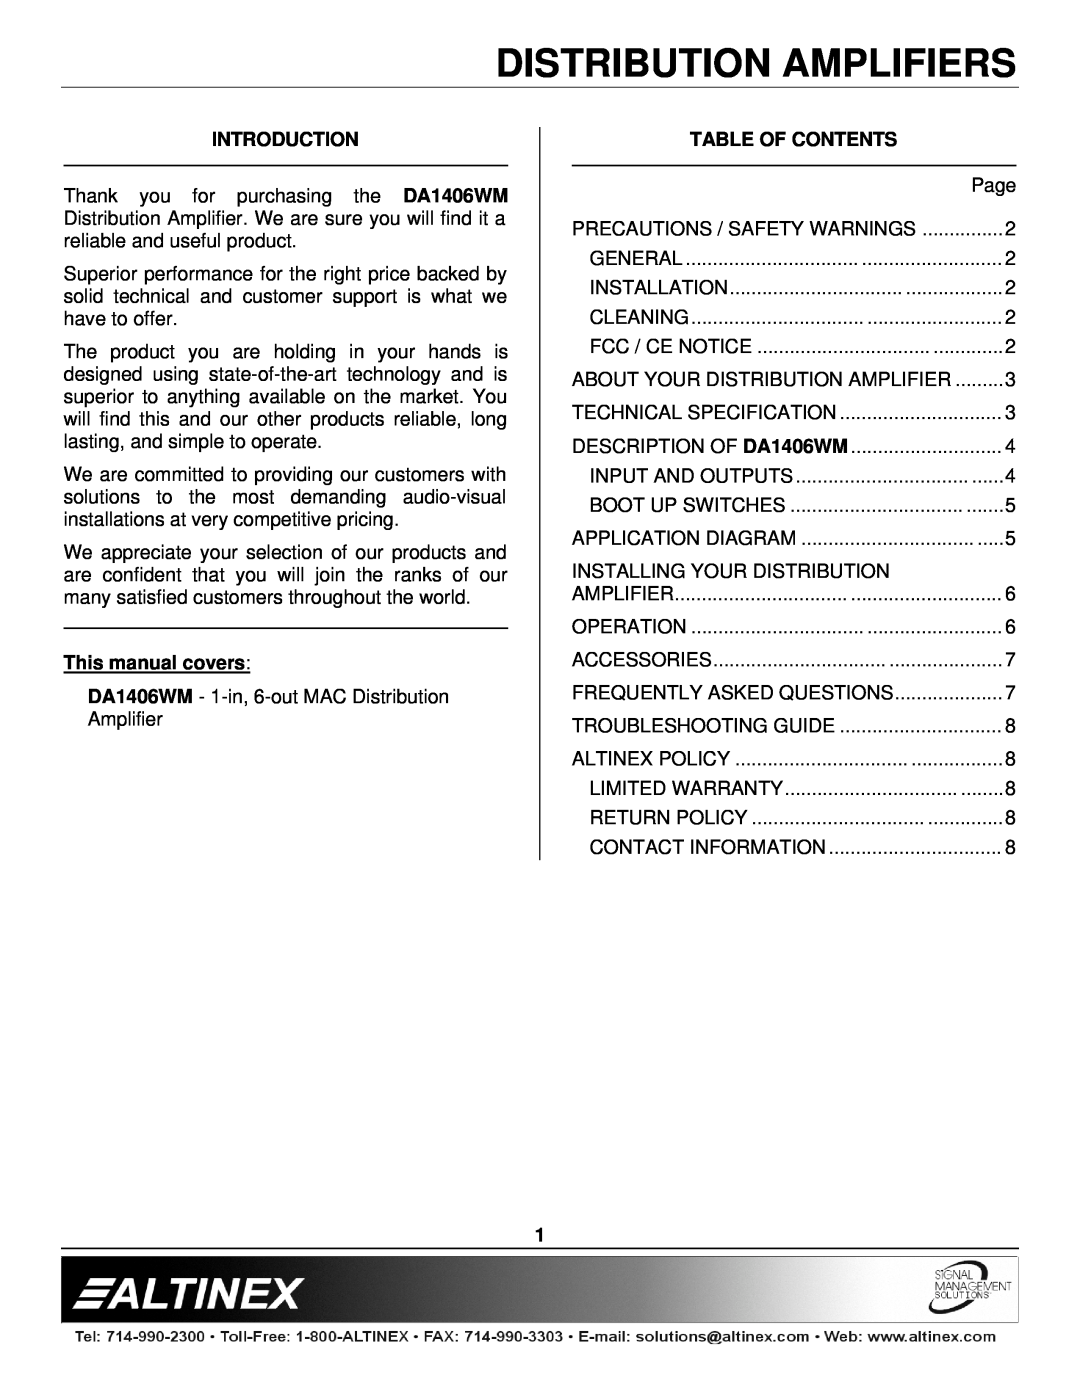 Altinex DA1406WM Introduction, This manual covers, Table Of Contents, Distribution Amplifiers 